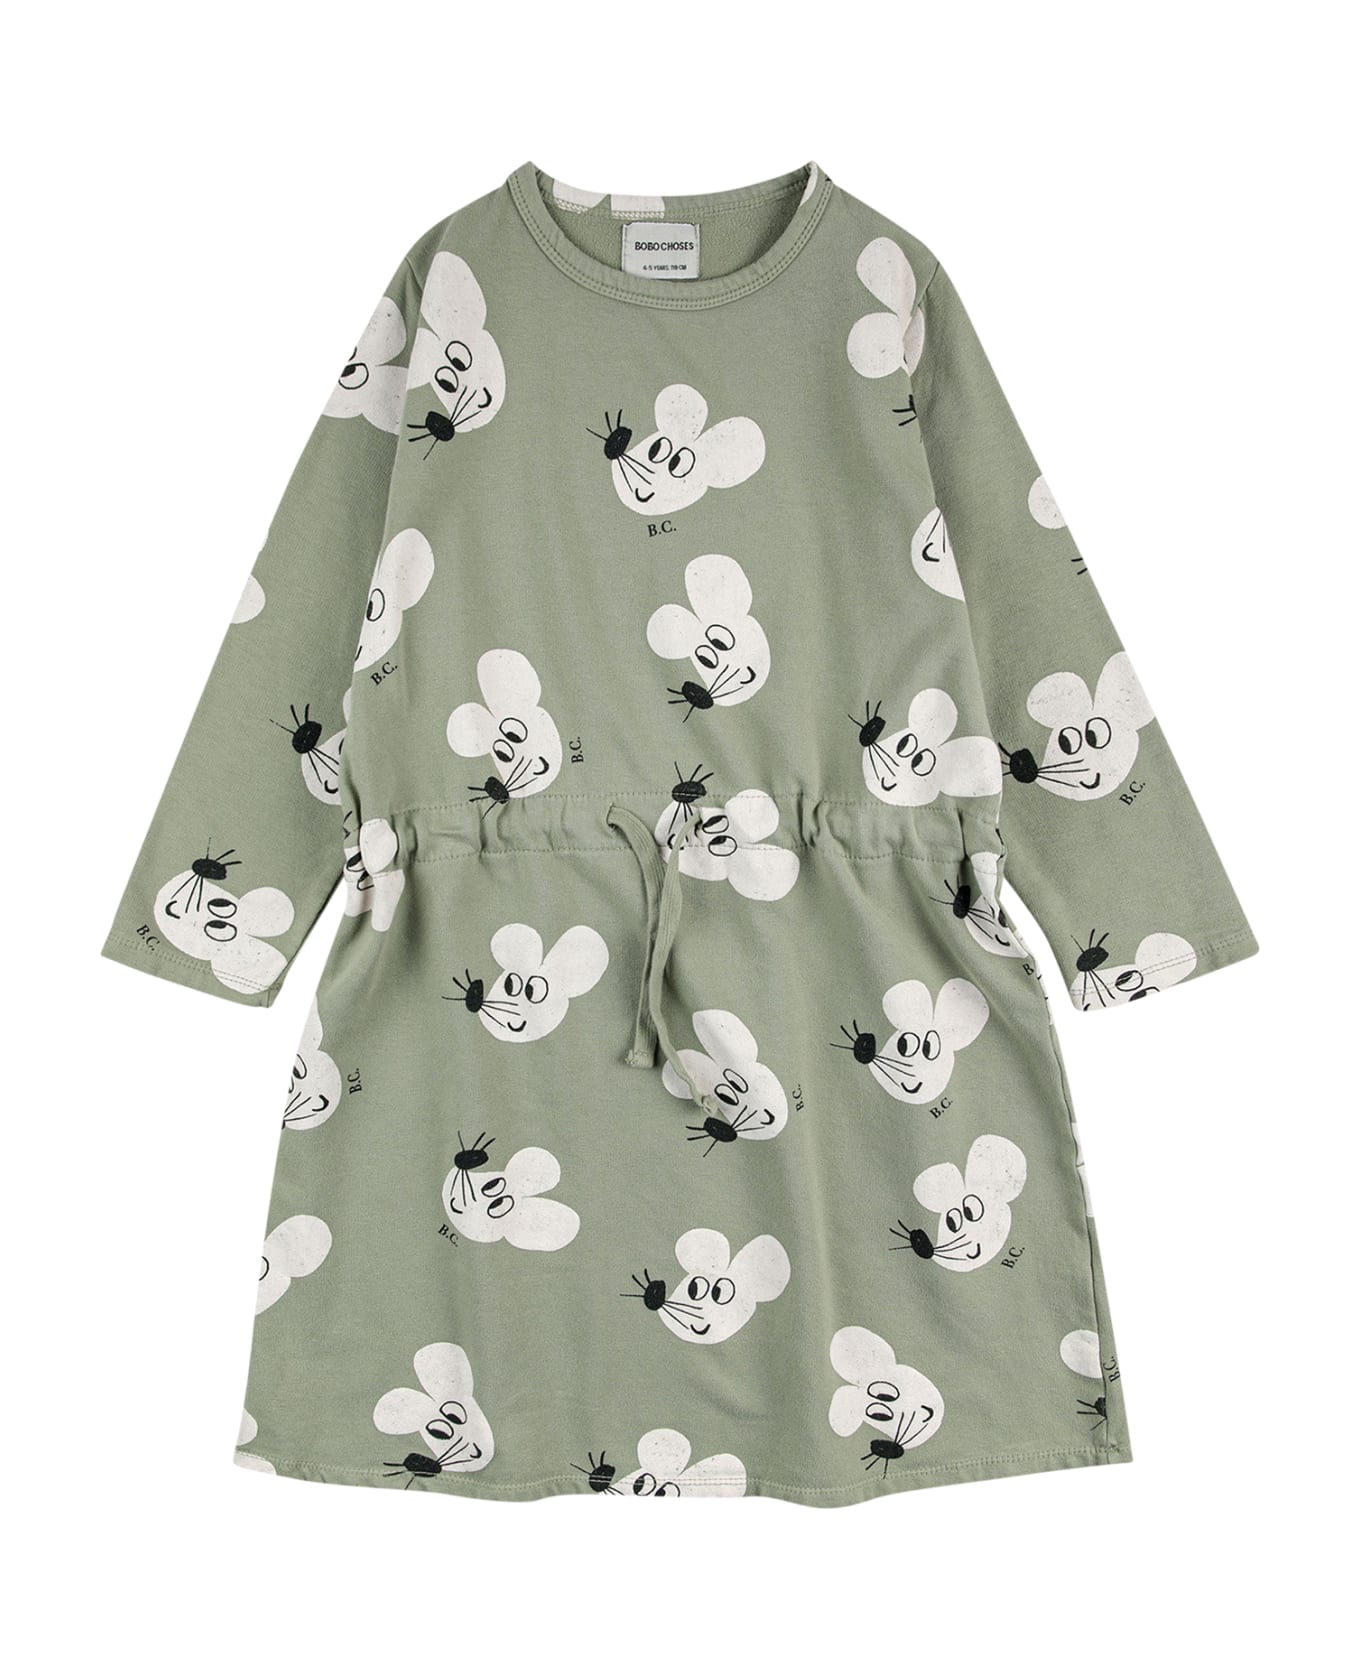 Bobo Choses Green Dress For Girl With Mice Print - Green